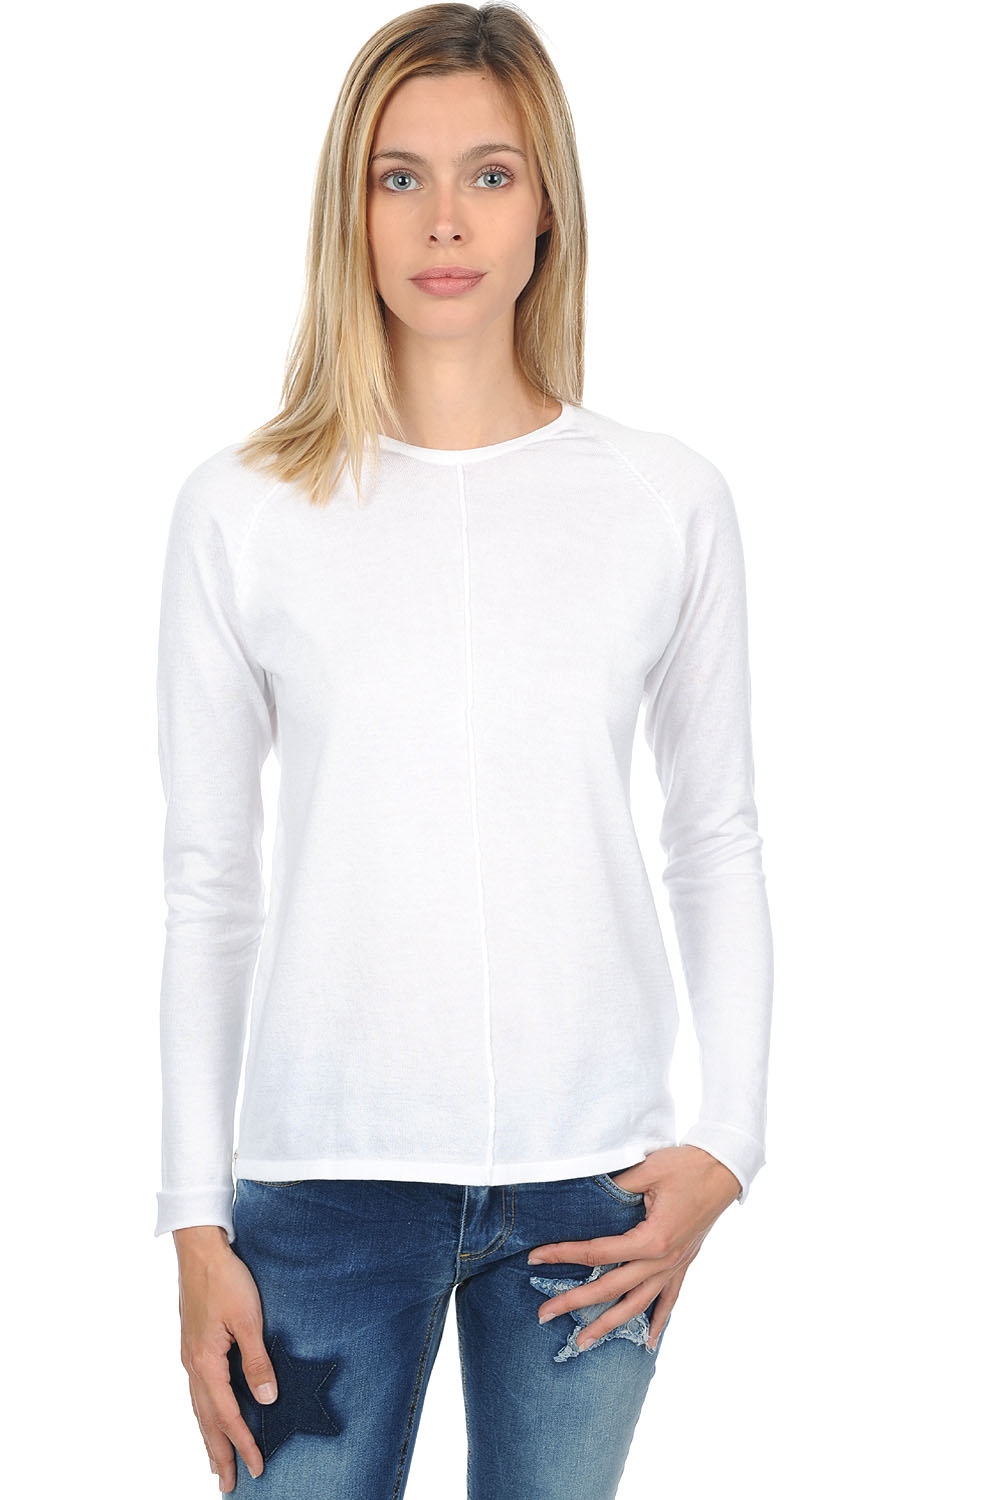 Coton Giza 45 pull femme col rond ireland blanc s